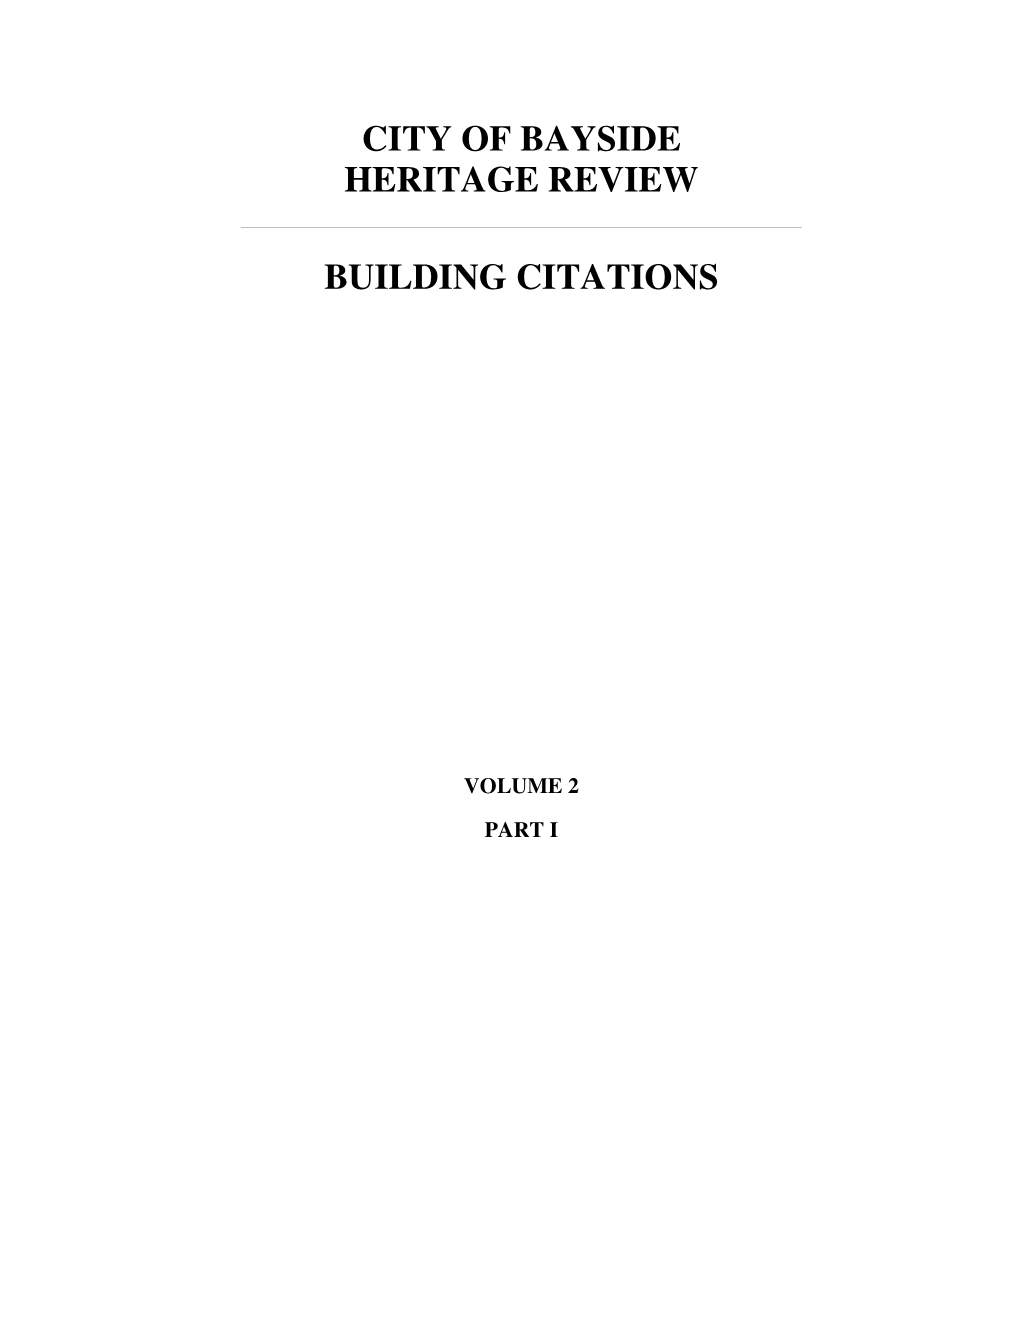 City of Bayside Heritage Review Building Citations